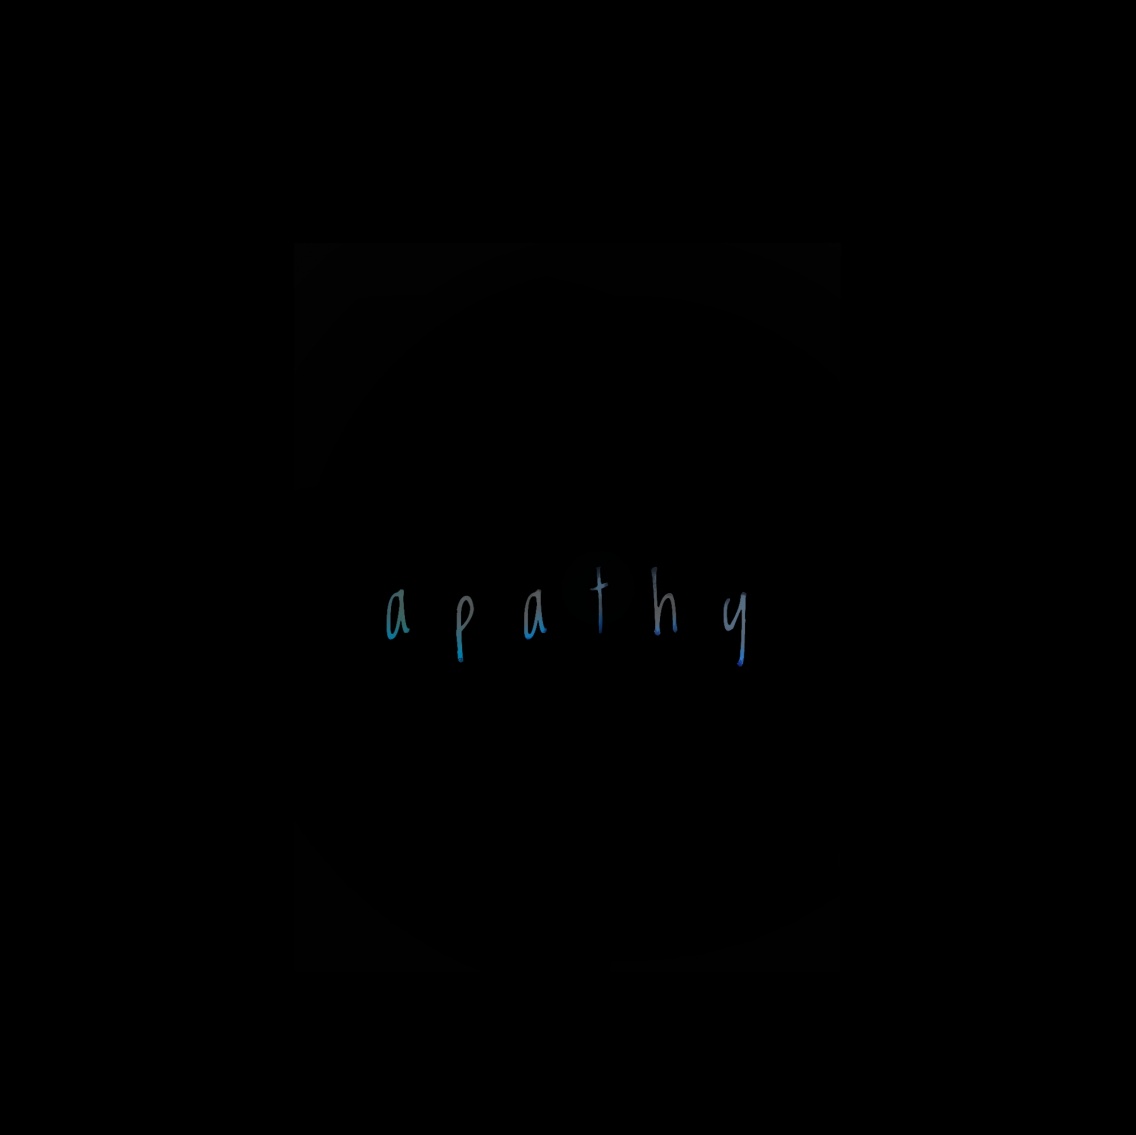 wordart #words #apathy #disconnection #drained #emotion #feeling #blue #black #artsy #upset #apathetic #dark #lost #confused